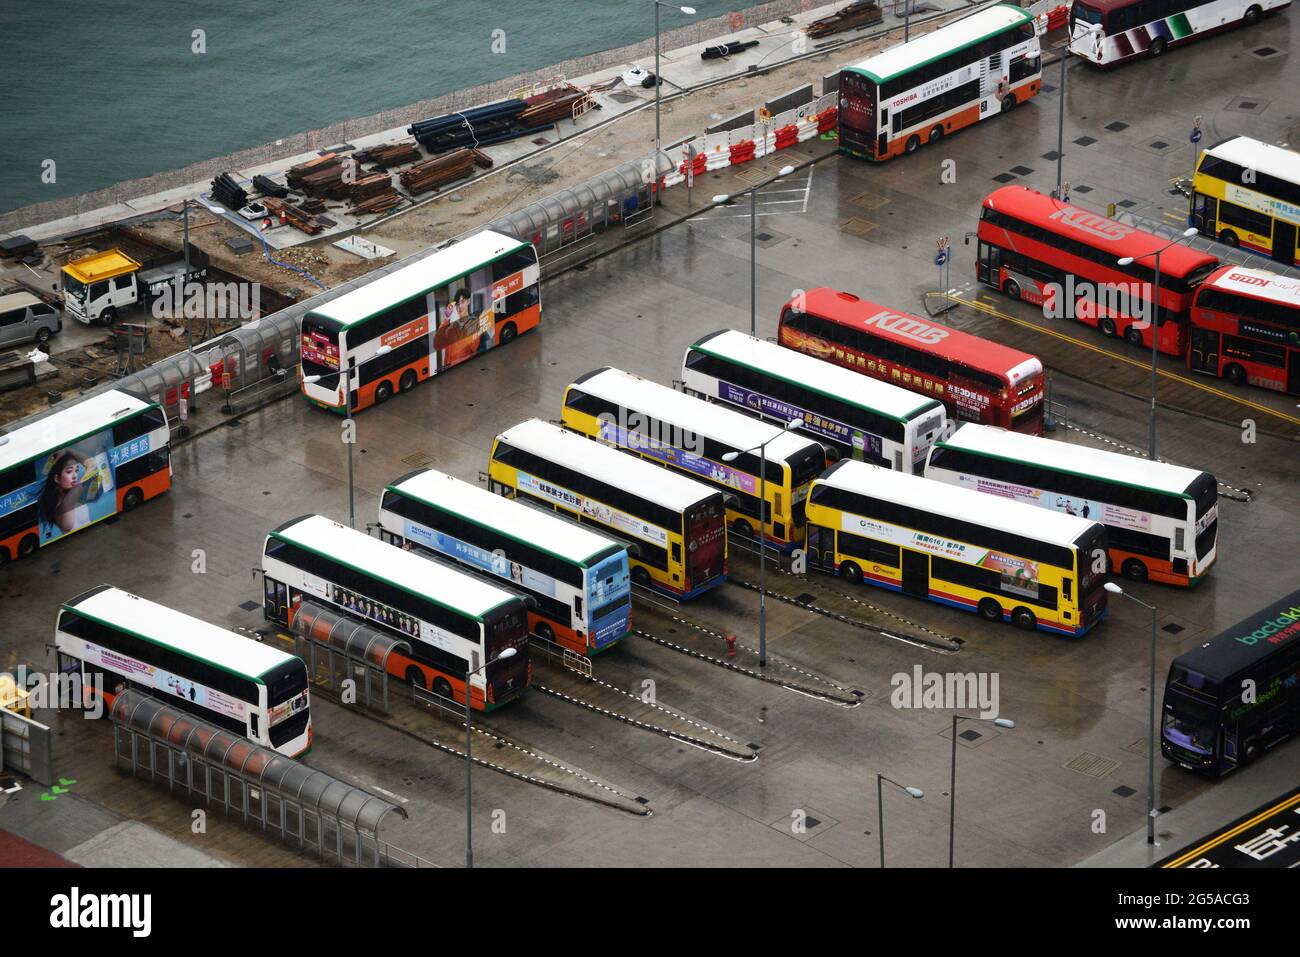 Aerial view of HK Double Decker busses in a parking lot in Wan Chai, Hong Kong. Stock Photo